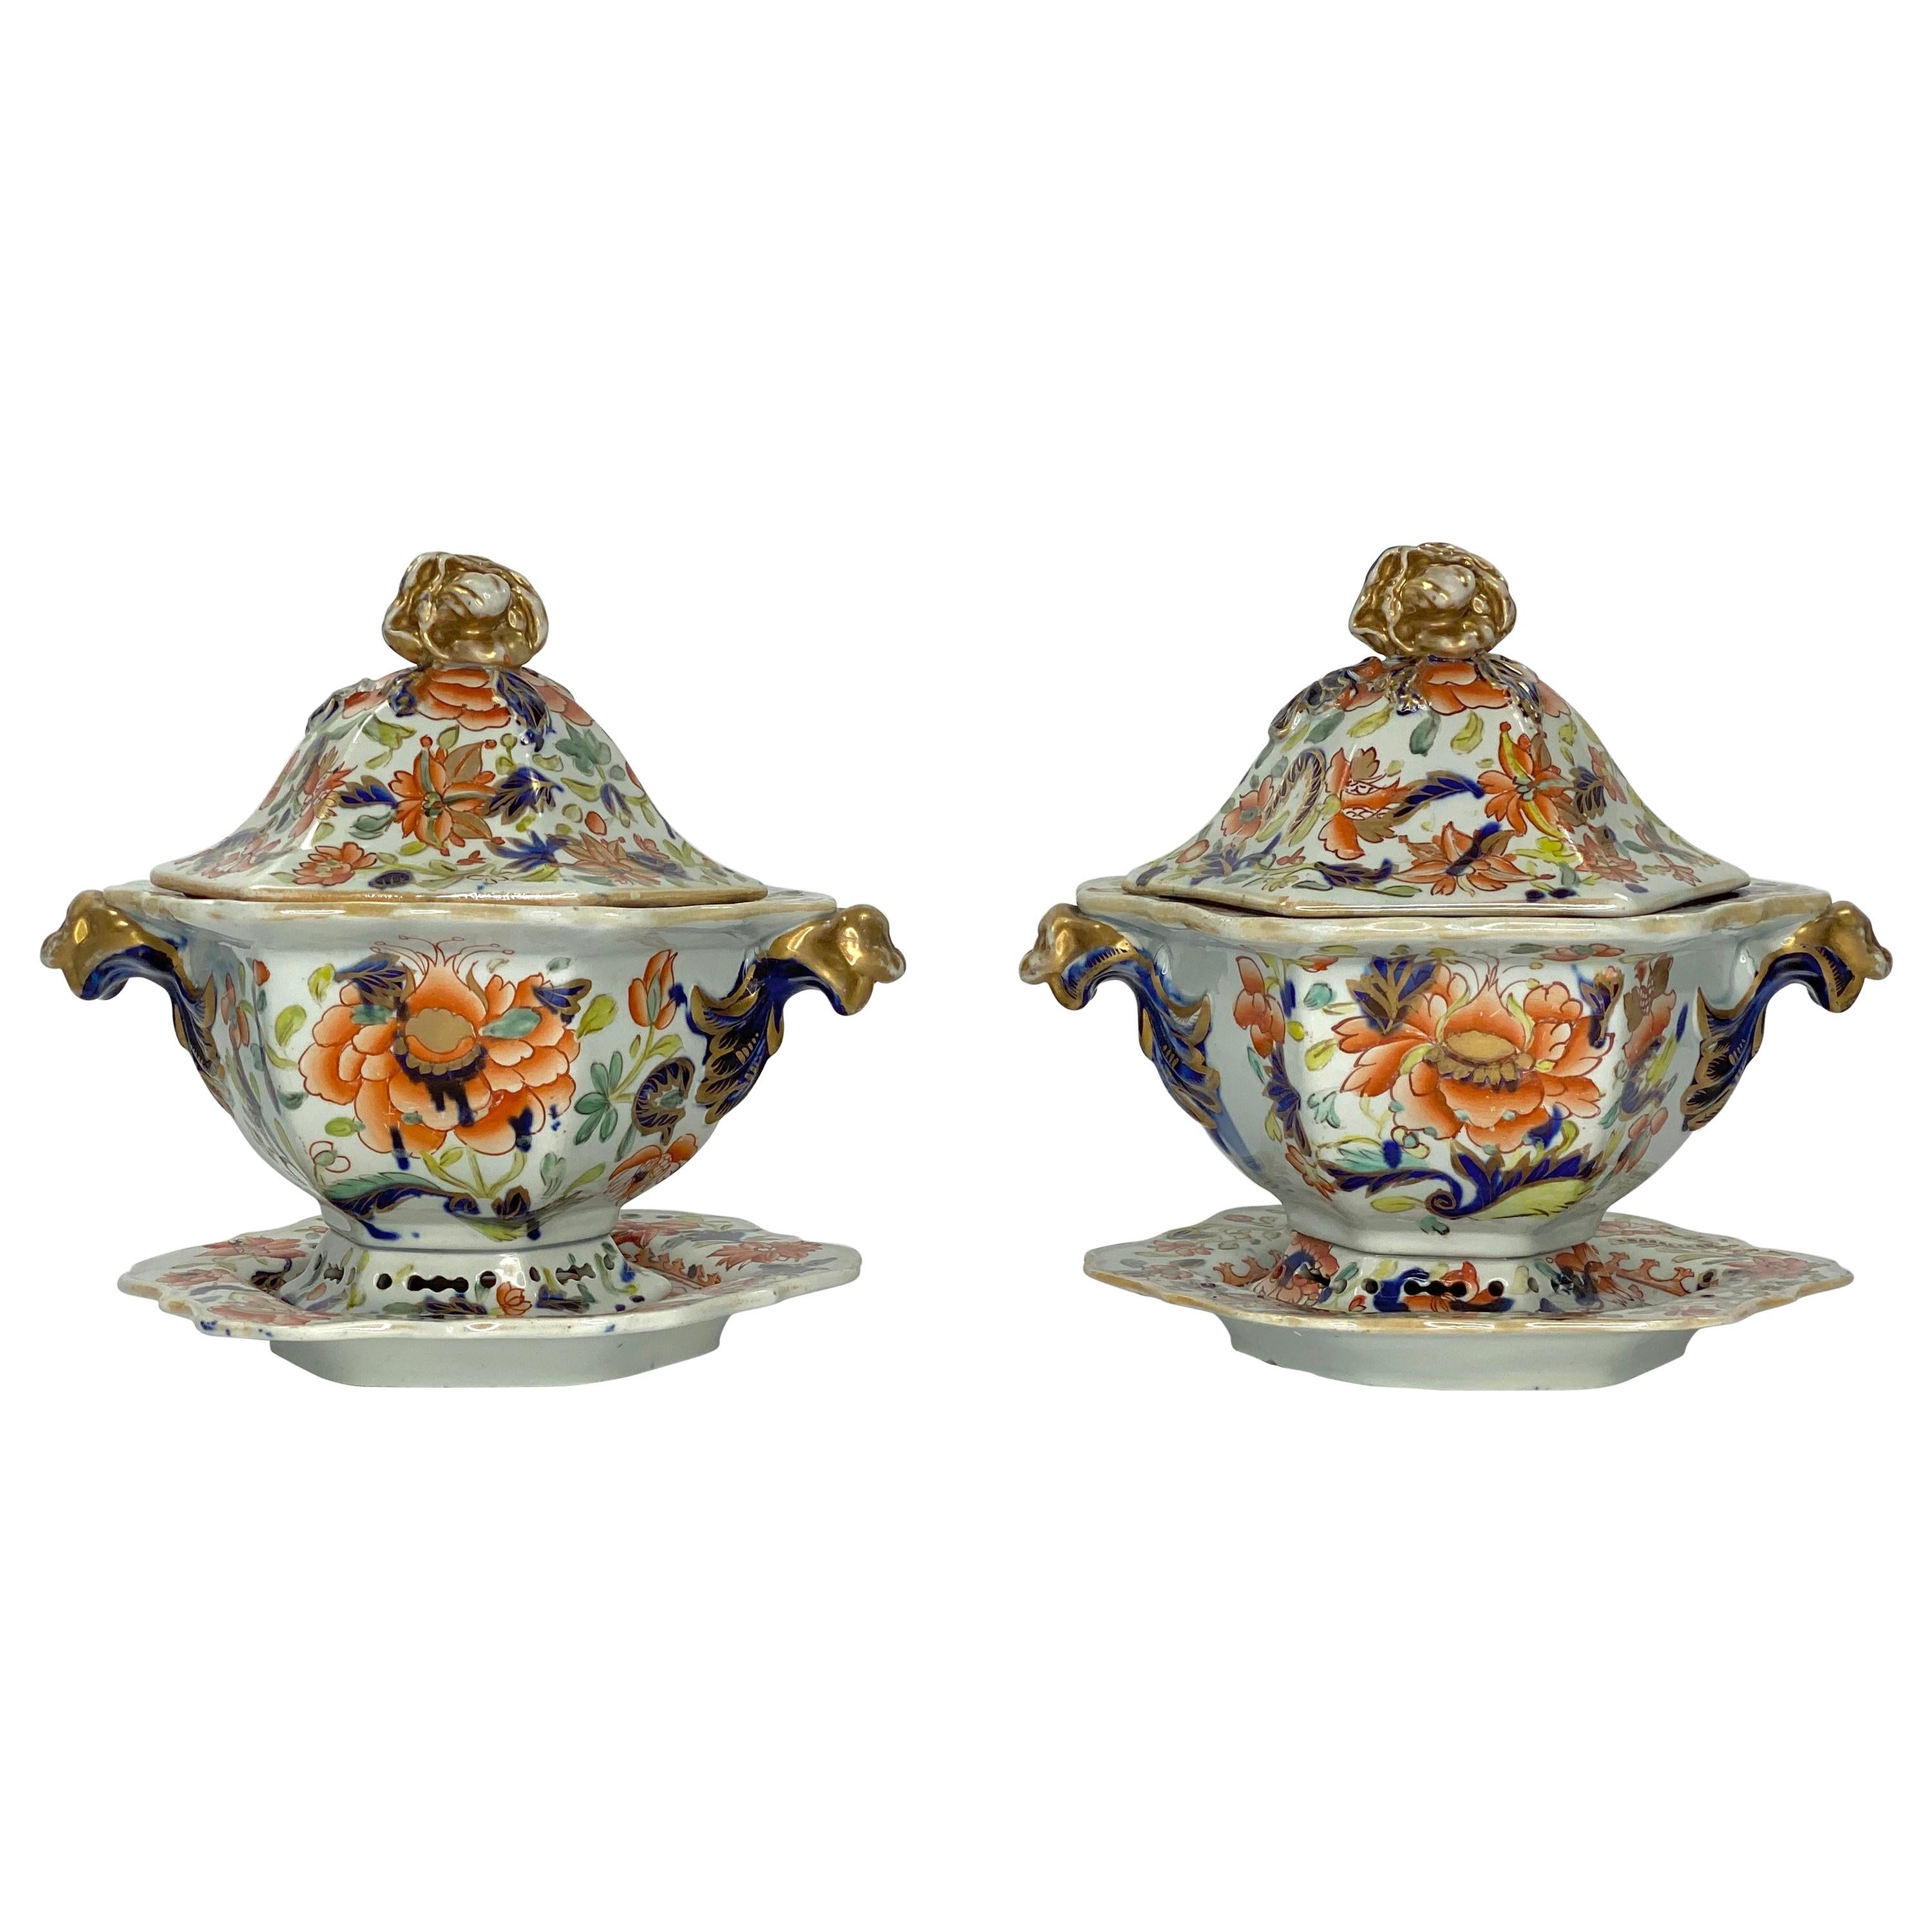 Pair of Masons Ironstone Tureens, Covers and Stands, circa 1815